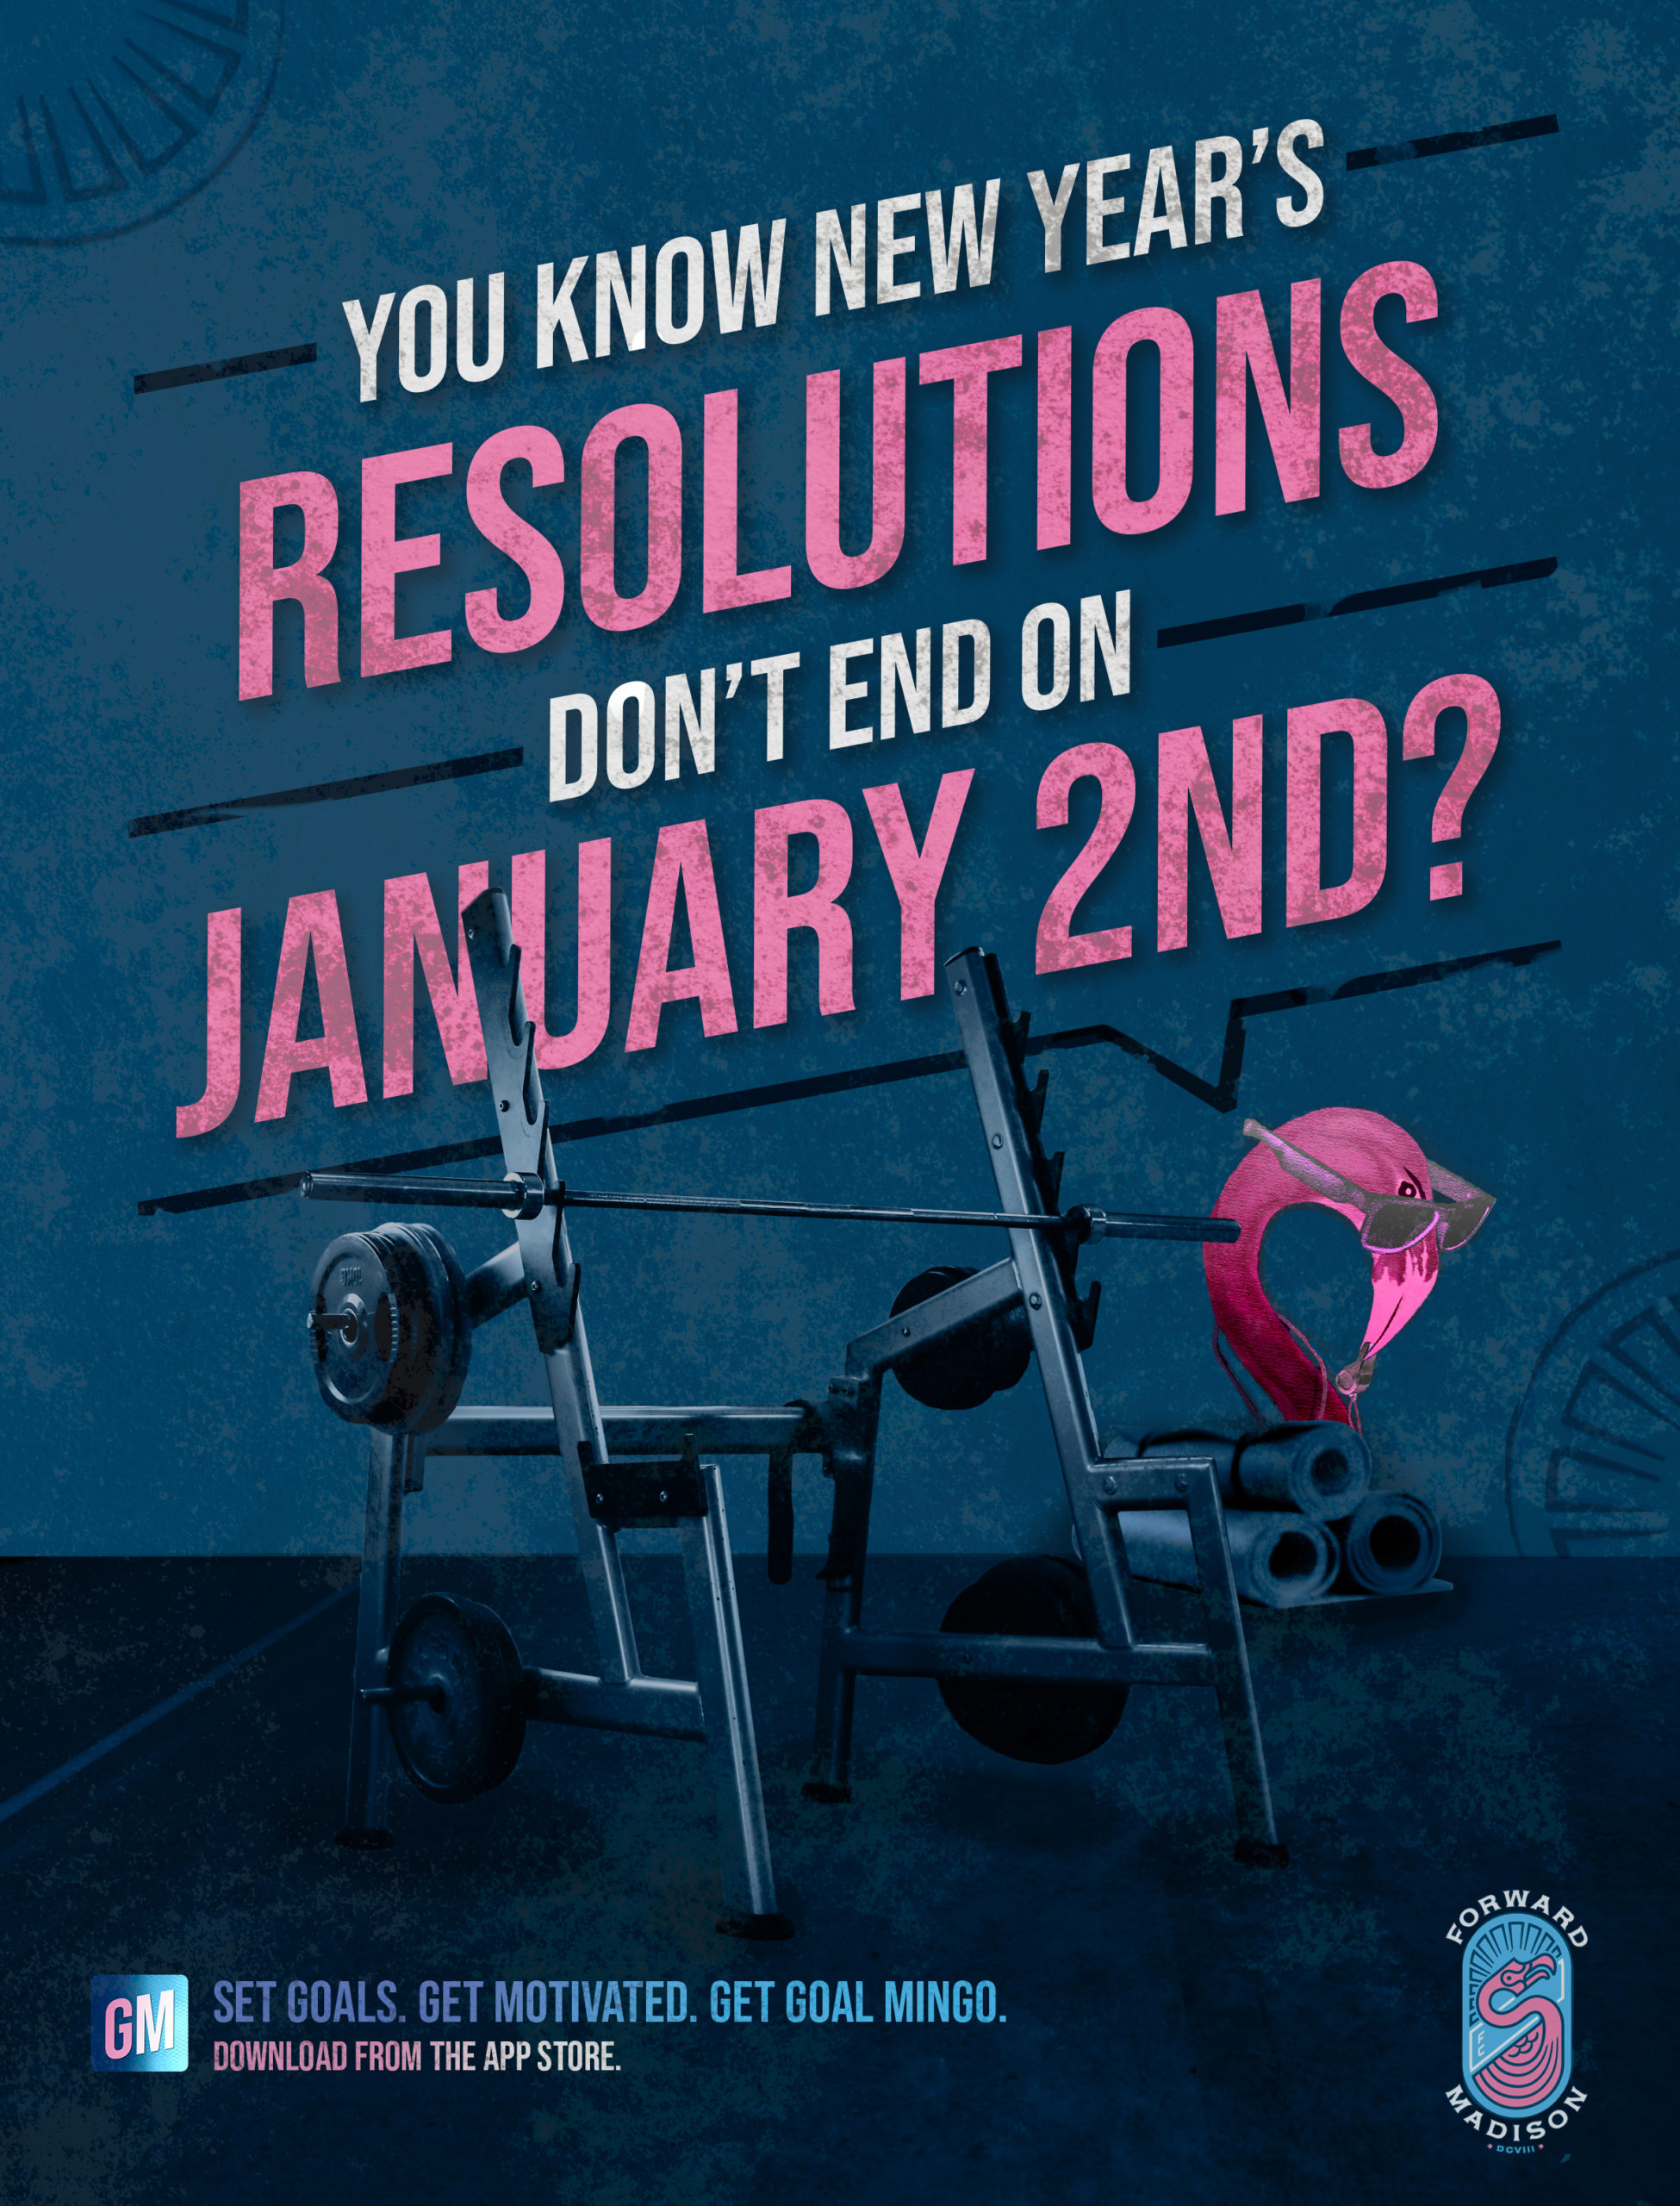 You know new year's resolutions don't end on January second, right?